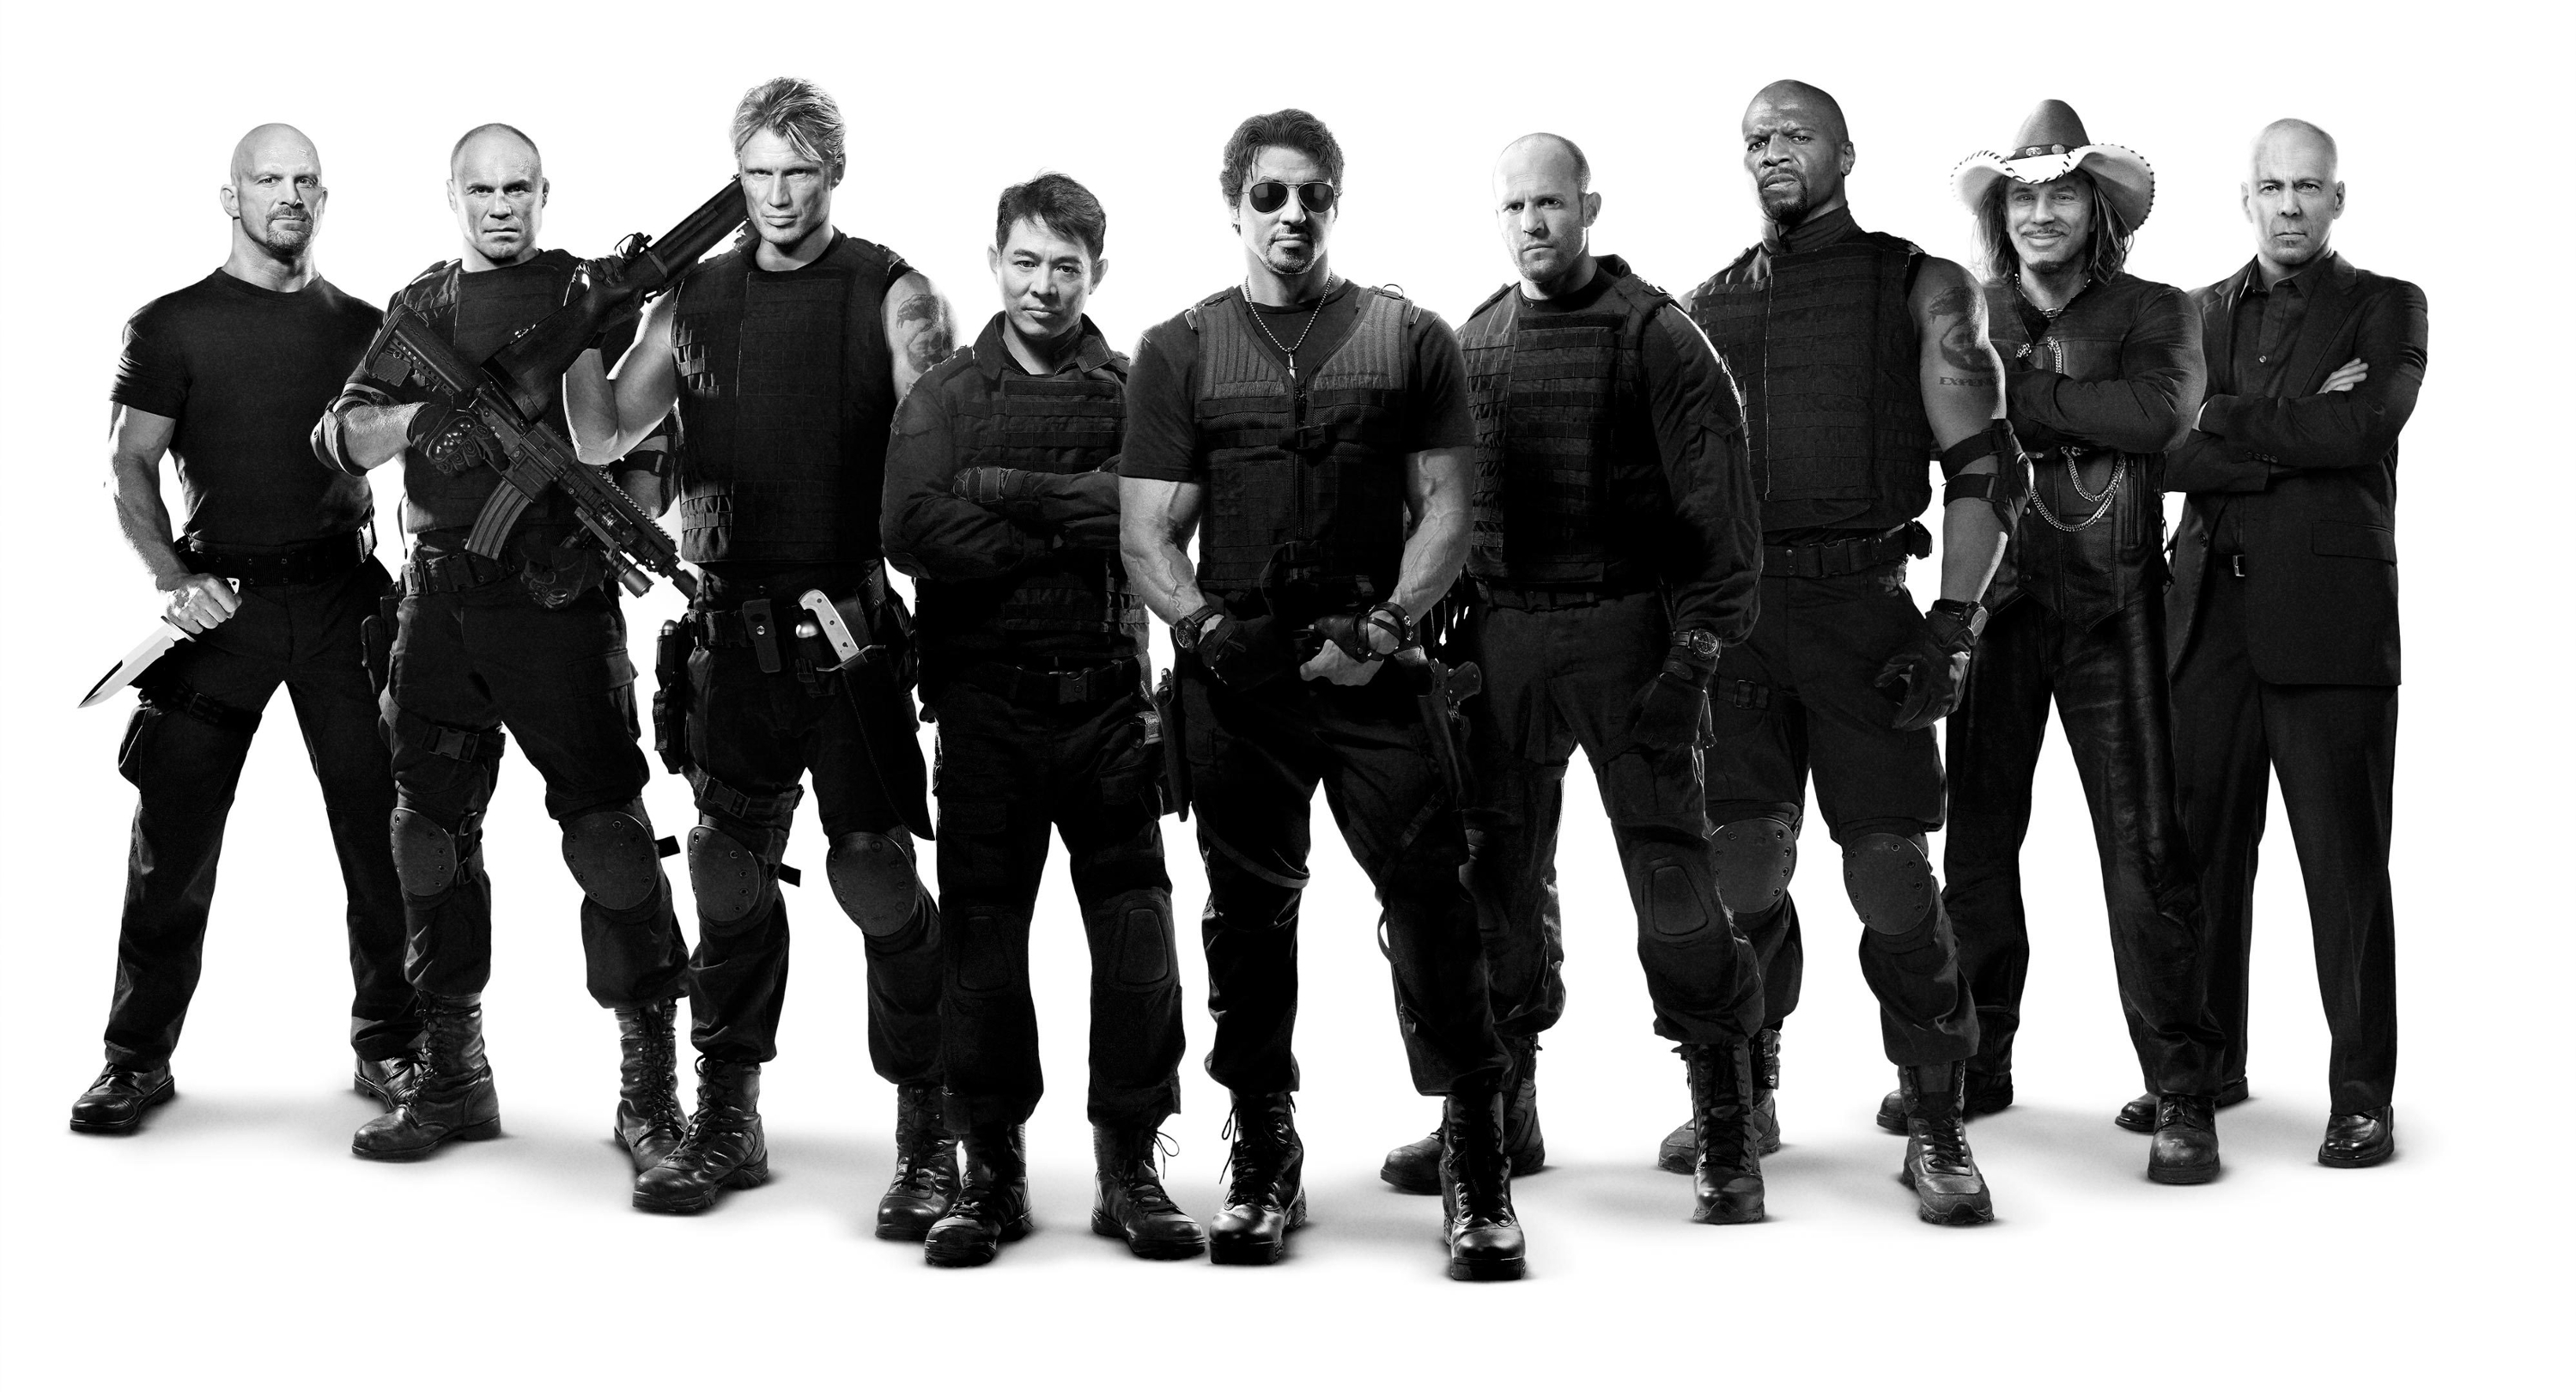 movie, the expendables, barney ross, bruce willis, church (the expendables), dan paine, dolph lundgren, gunnar jensen, hale caesar, jason statham, jet li, lee christmas, mickey rourke, randy couture, steve austin, sylvester stallone, terry crews, toll road, tool (the expendables), yin yang (the expendables) High Definition image